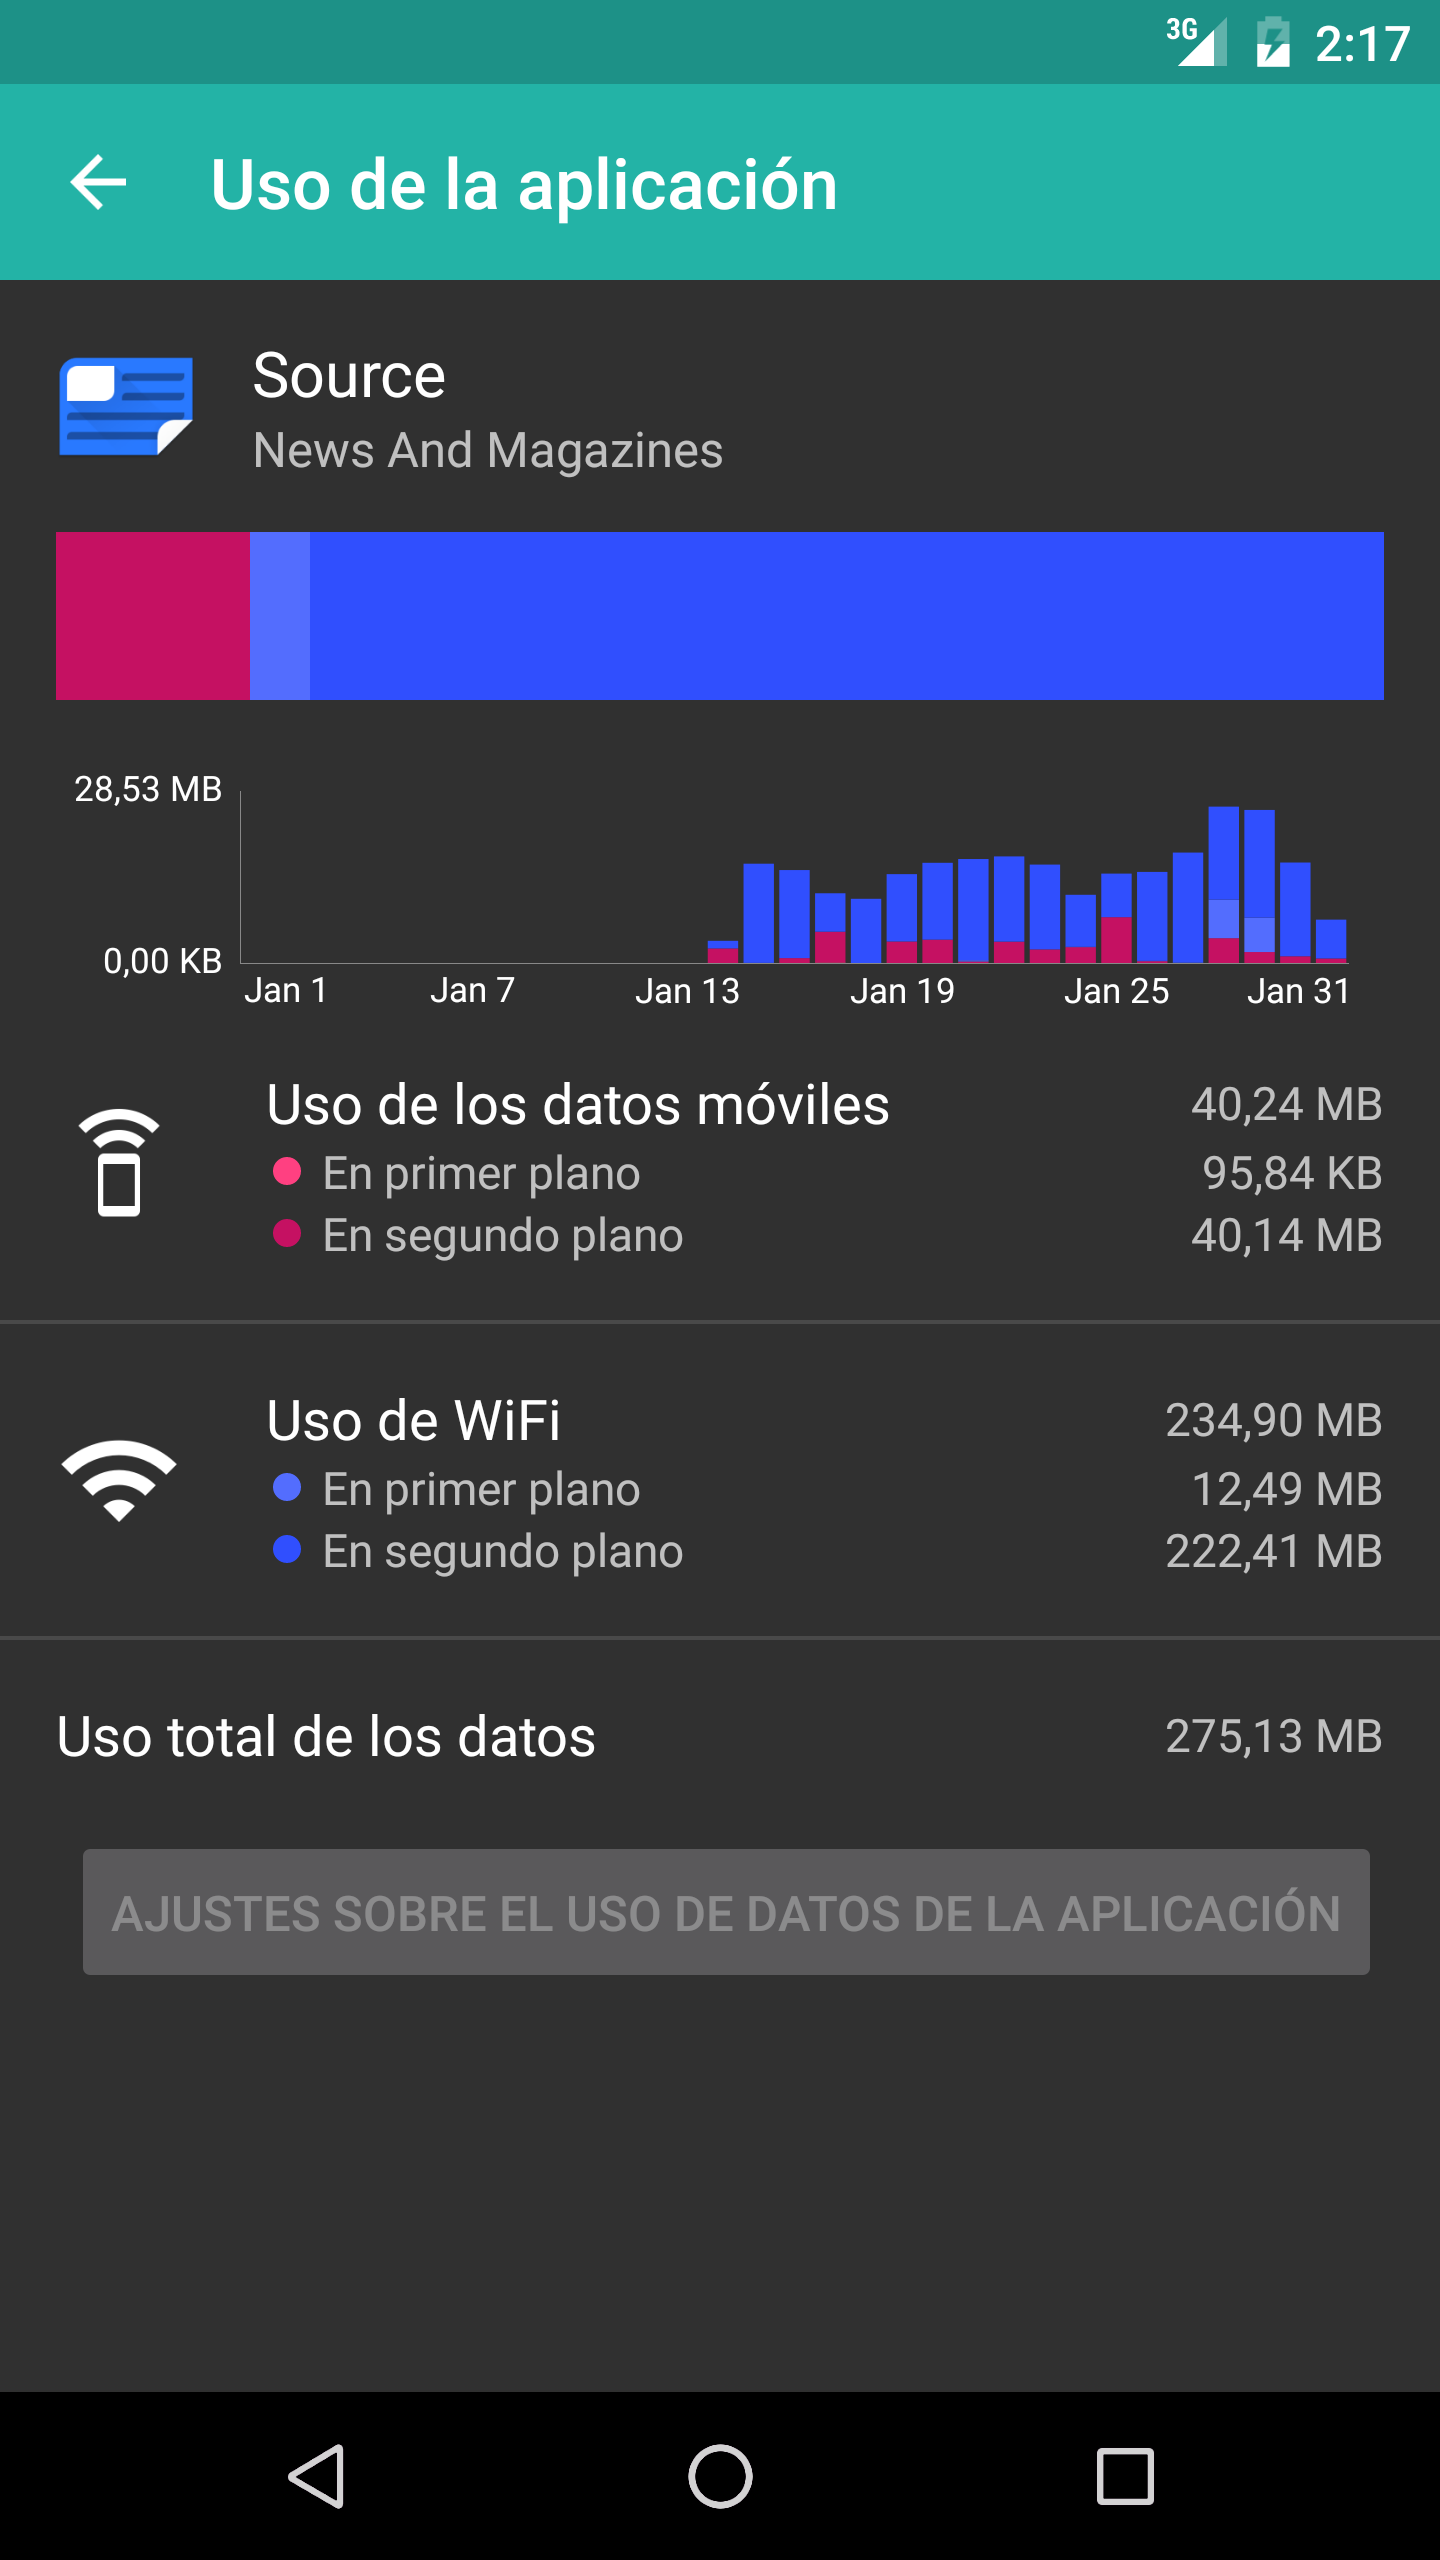 Android application Mobile Data Usage - Save Money screenshort